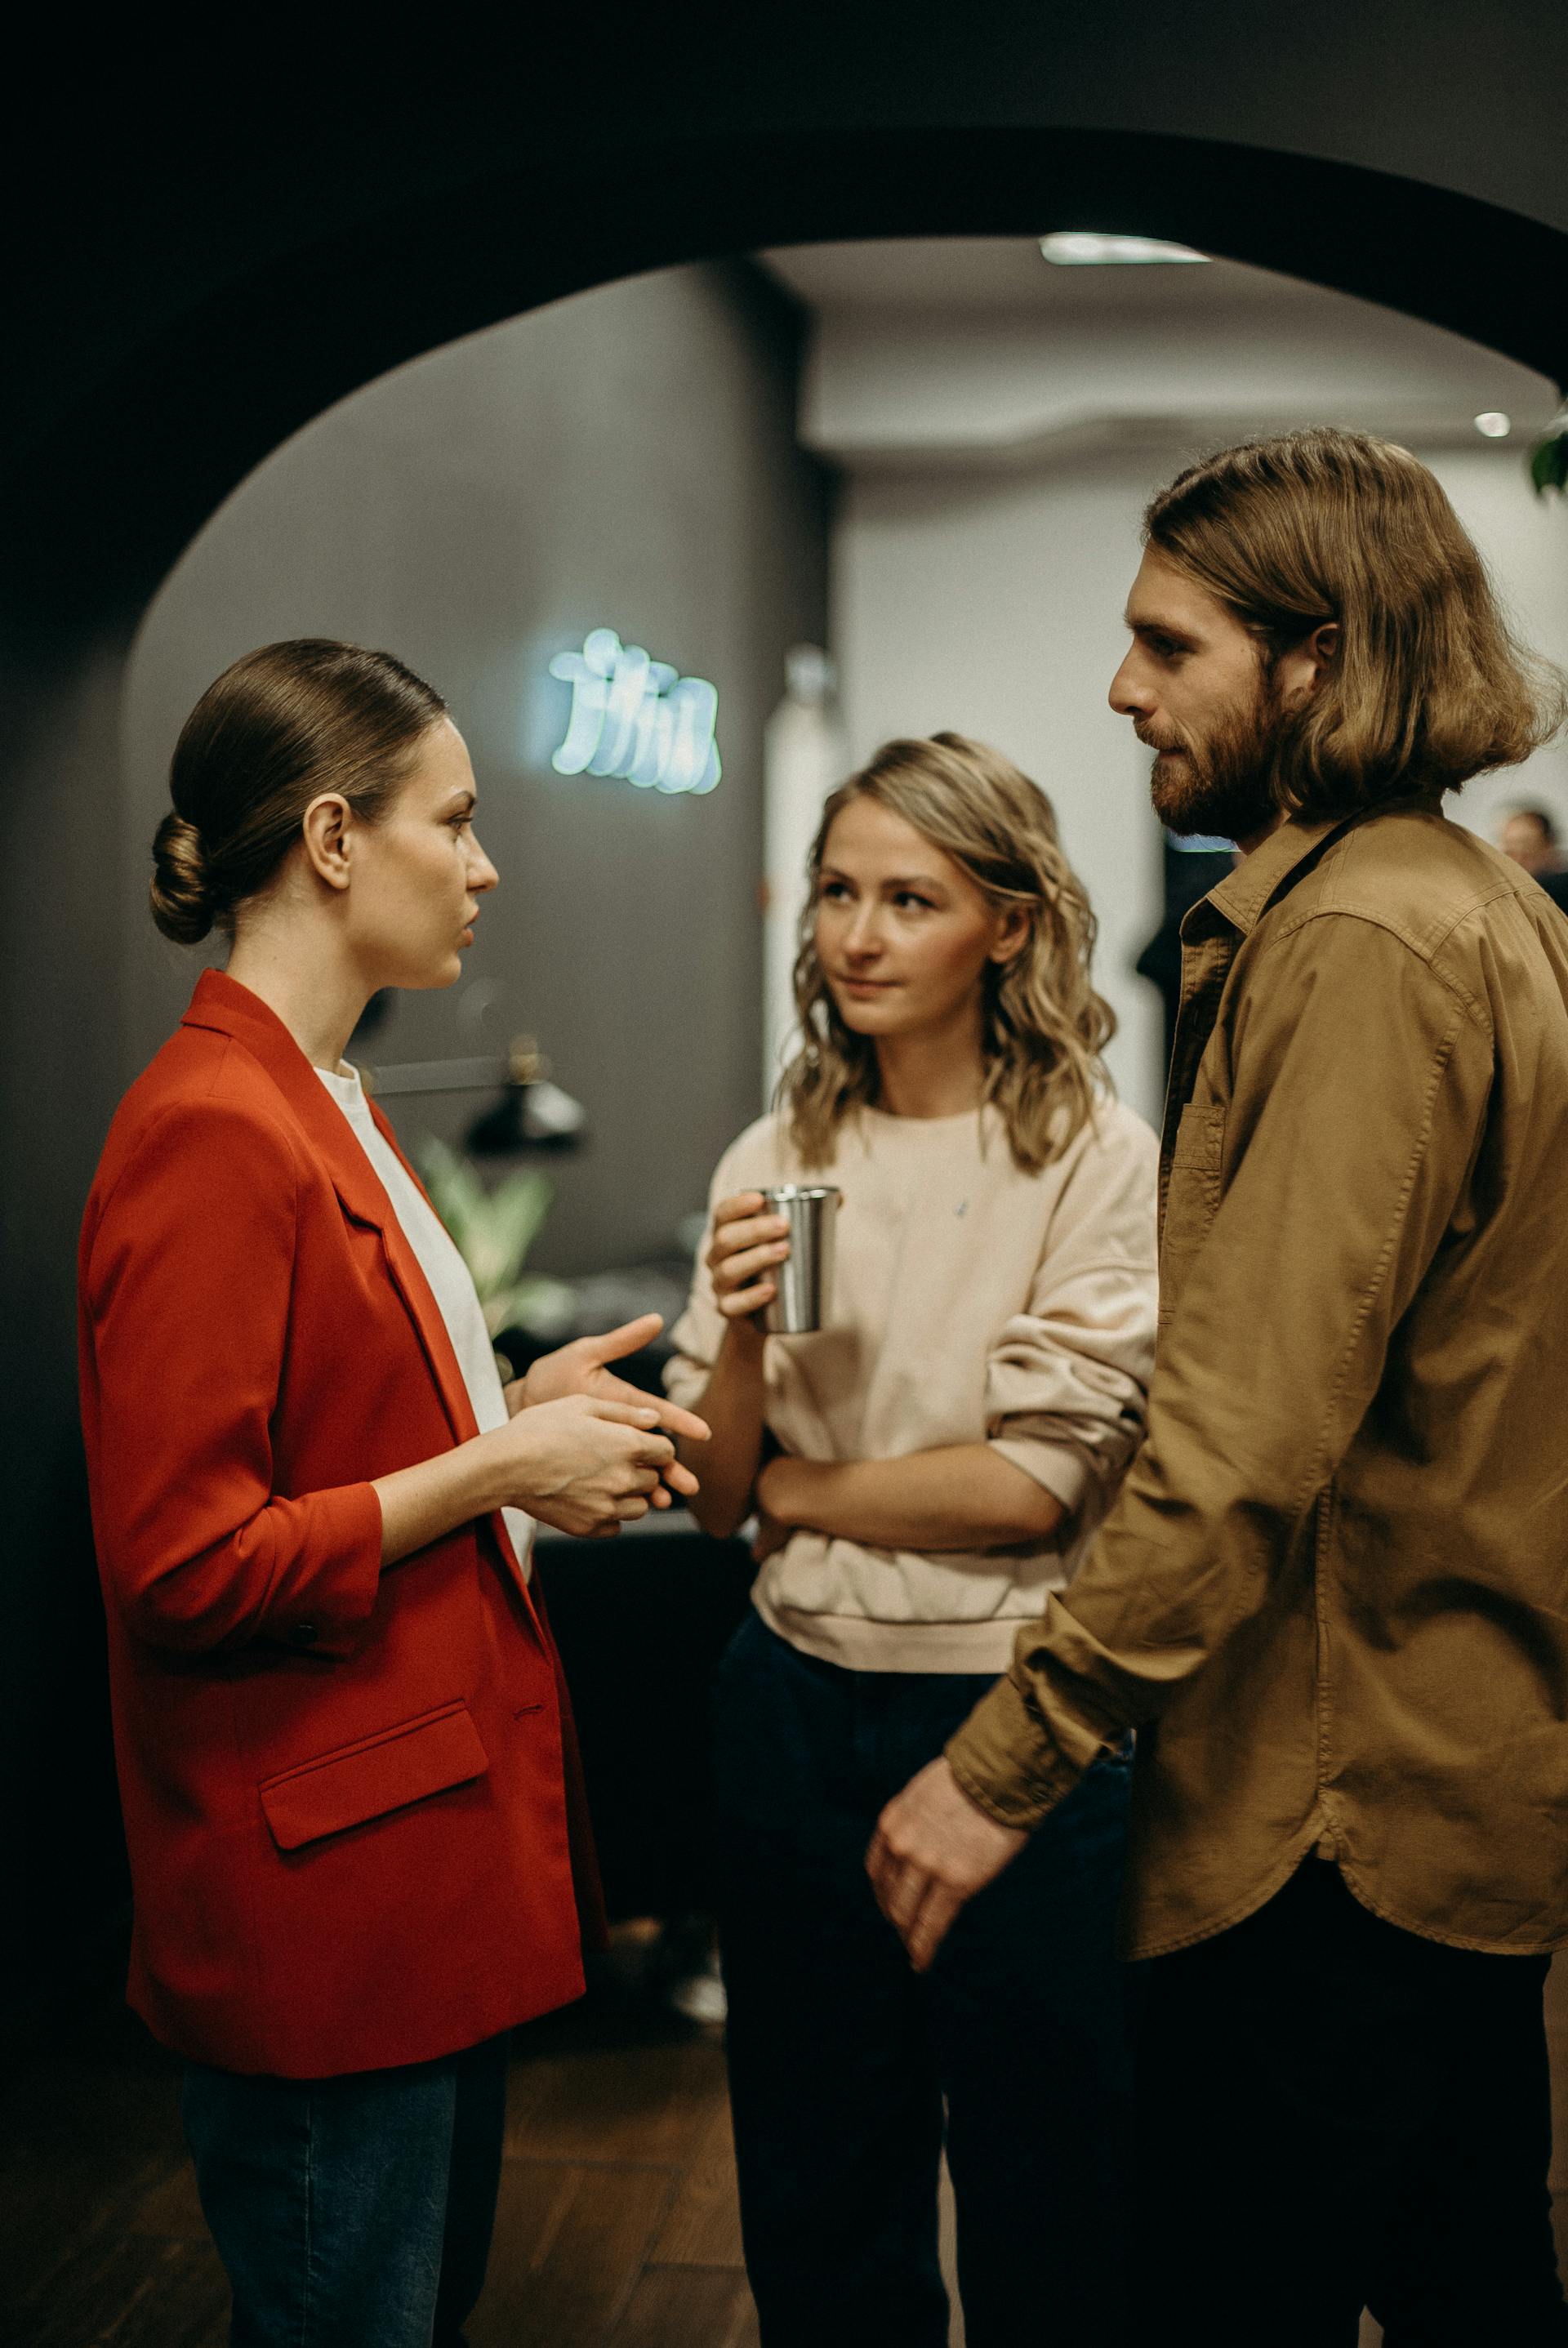 Colleagues talking in an office setting | Source: Pexels